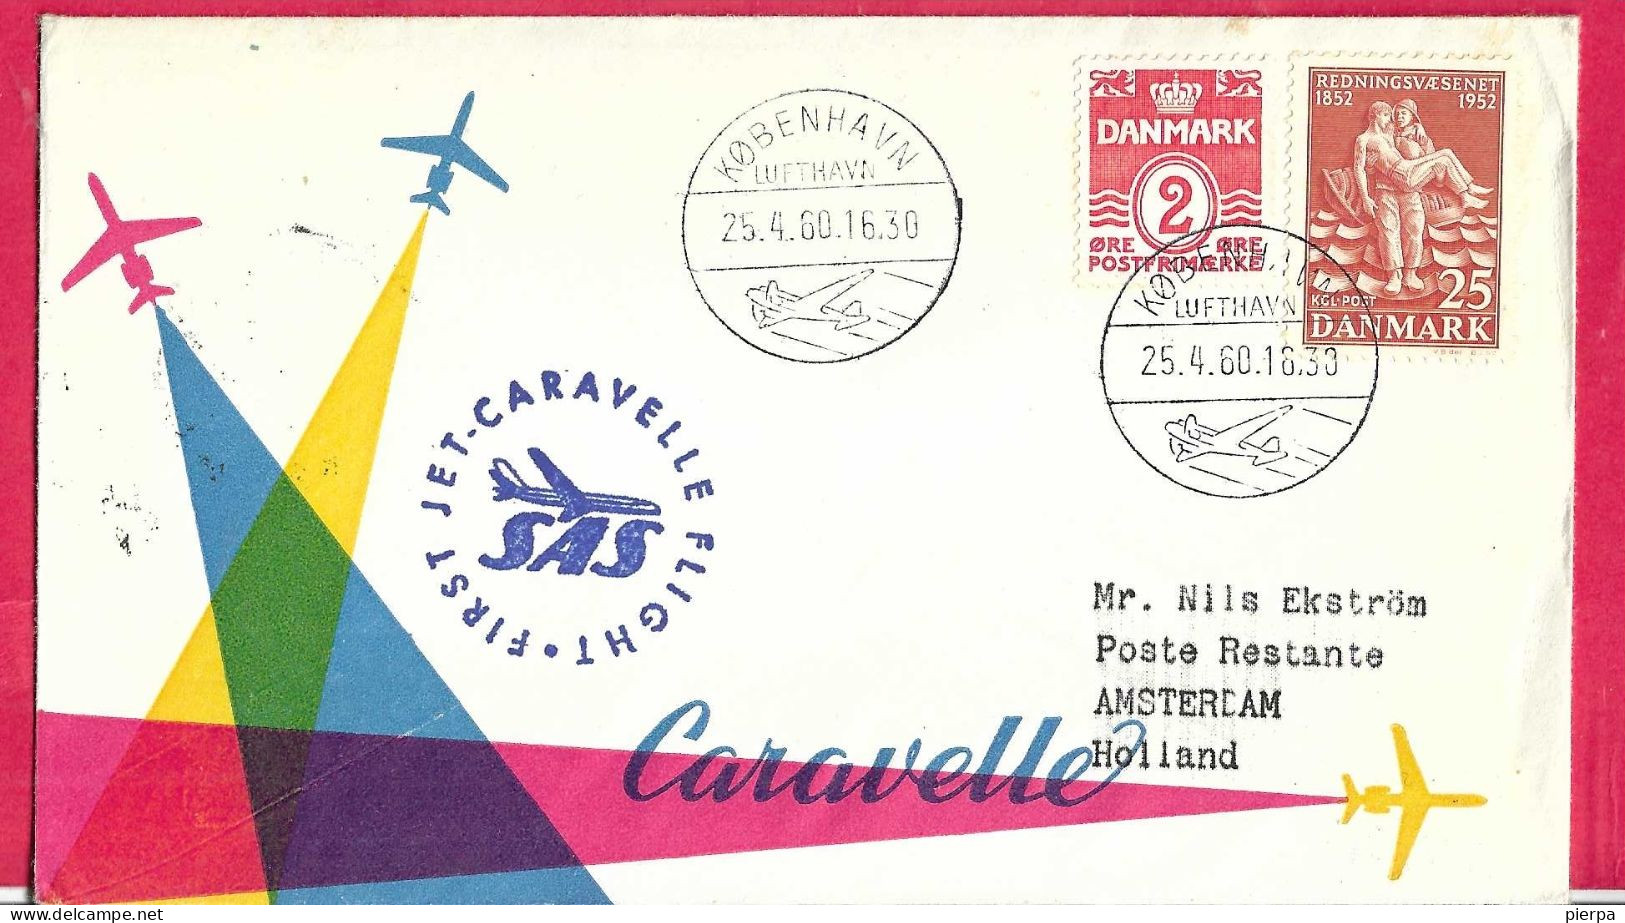 DANMARK - FIRST CARAVELLE FLIGHT - SAS - FROM KOBENHAVN TO AMSTERDAM *25.4.60* ON OFFICIAL COVER - Aéreo